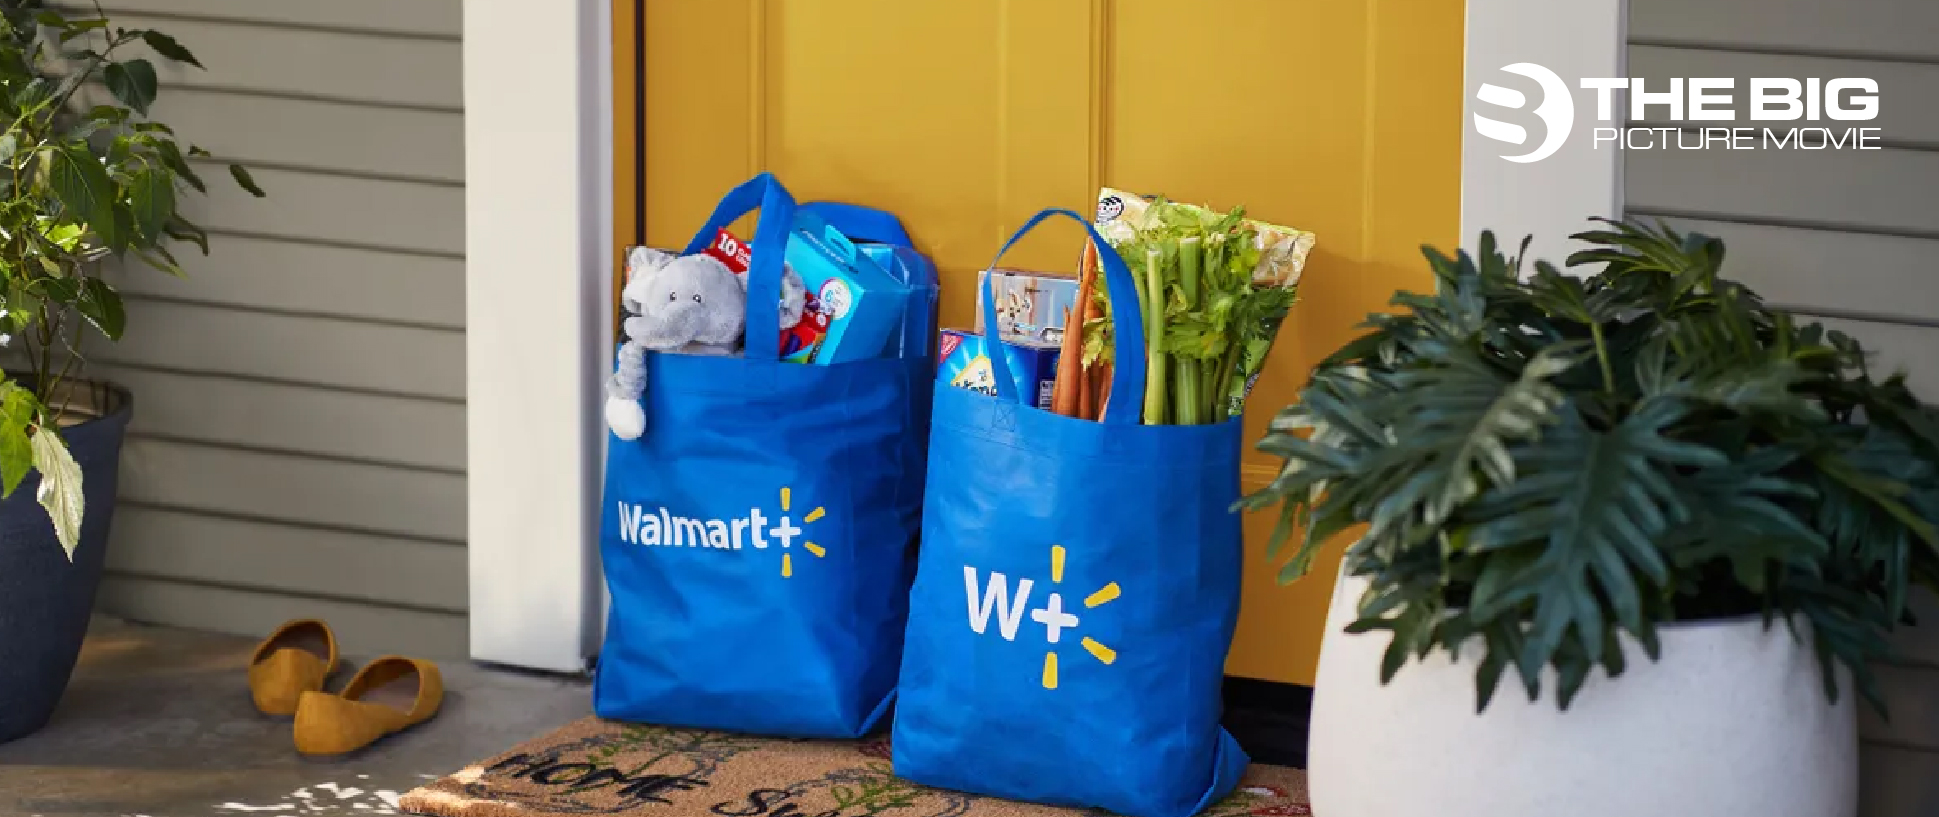 How to cancel Walmart subscription in Few Steps